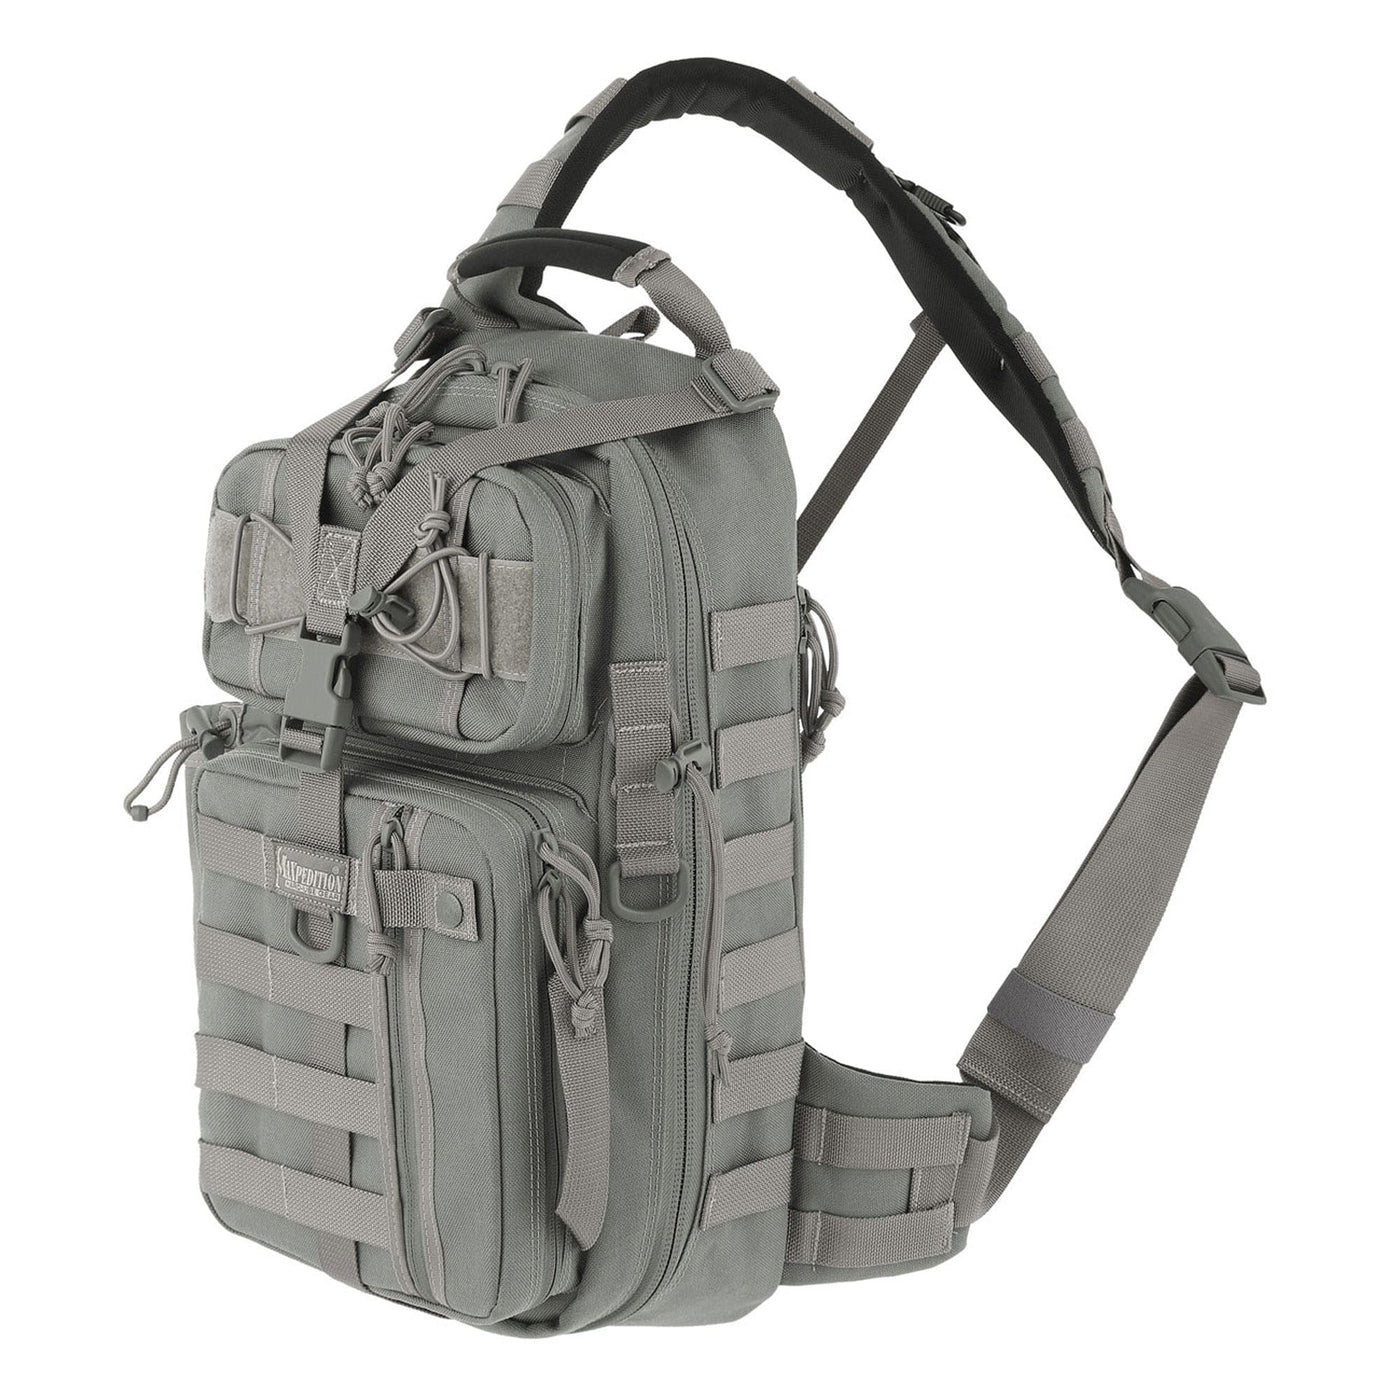 Maxpedition Maxpedition Sitka Gearslinger Fg Soft Gun Cases